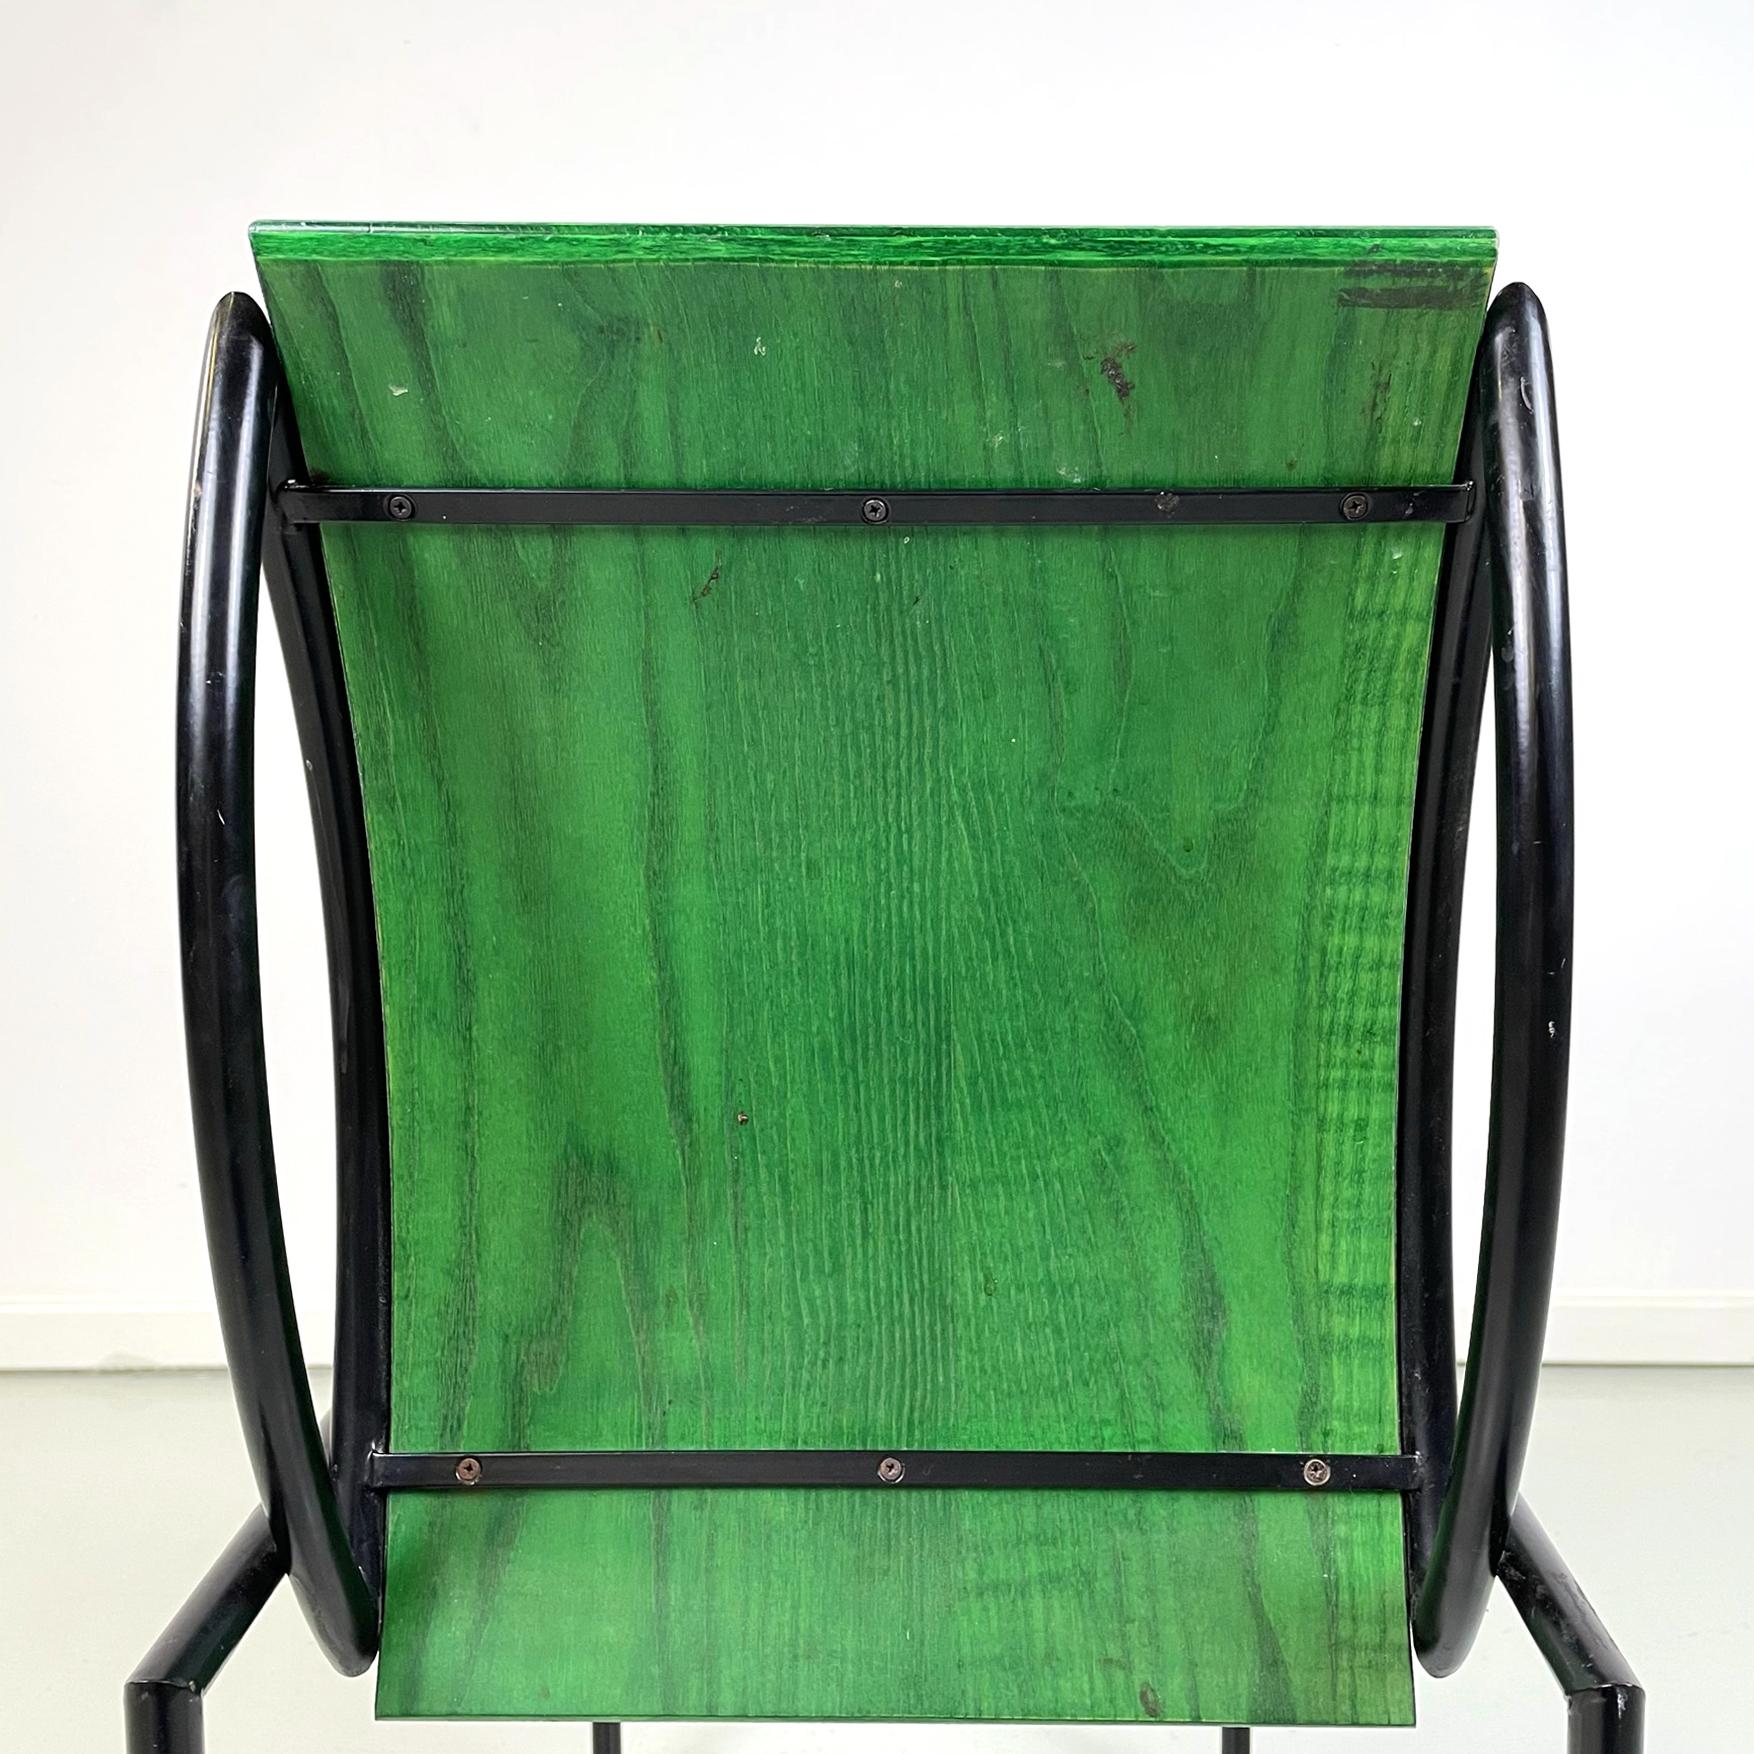 Italian modern Green wood black metal chair Kim by De Lucchi for Memphis, 1980s For Sale 8